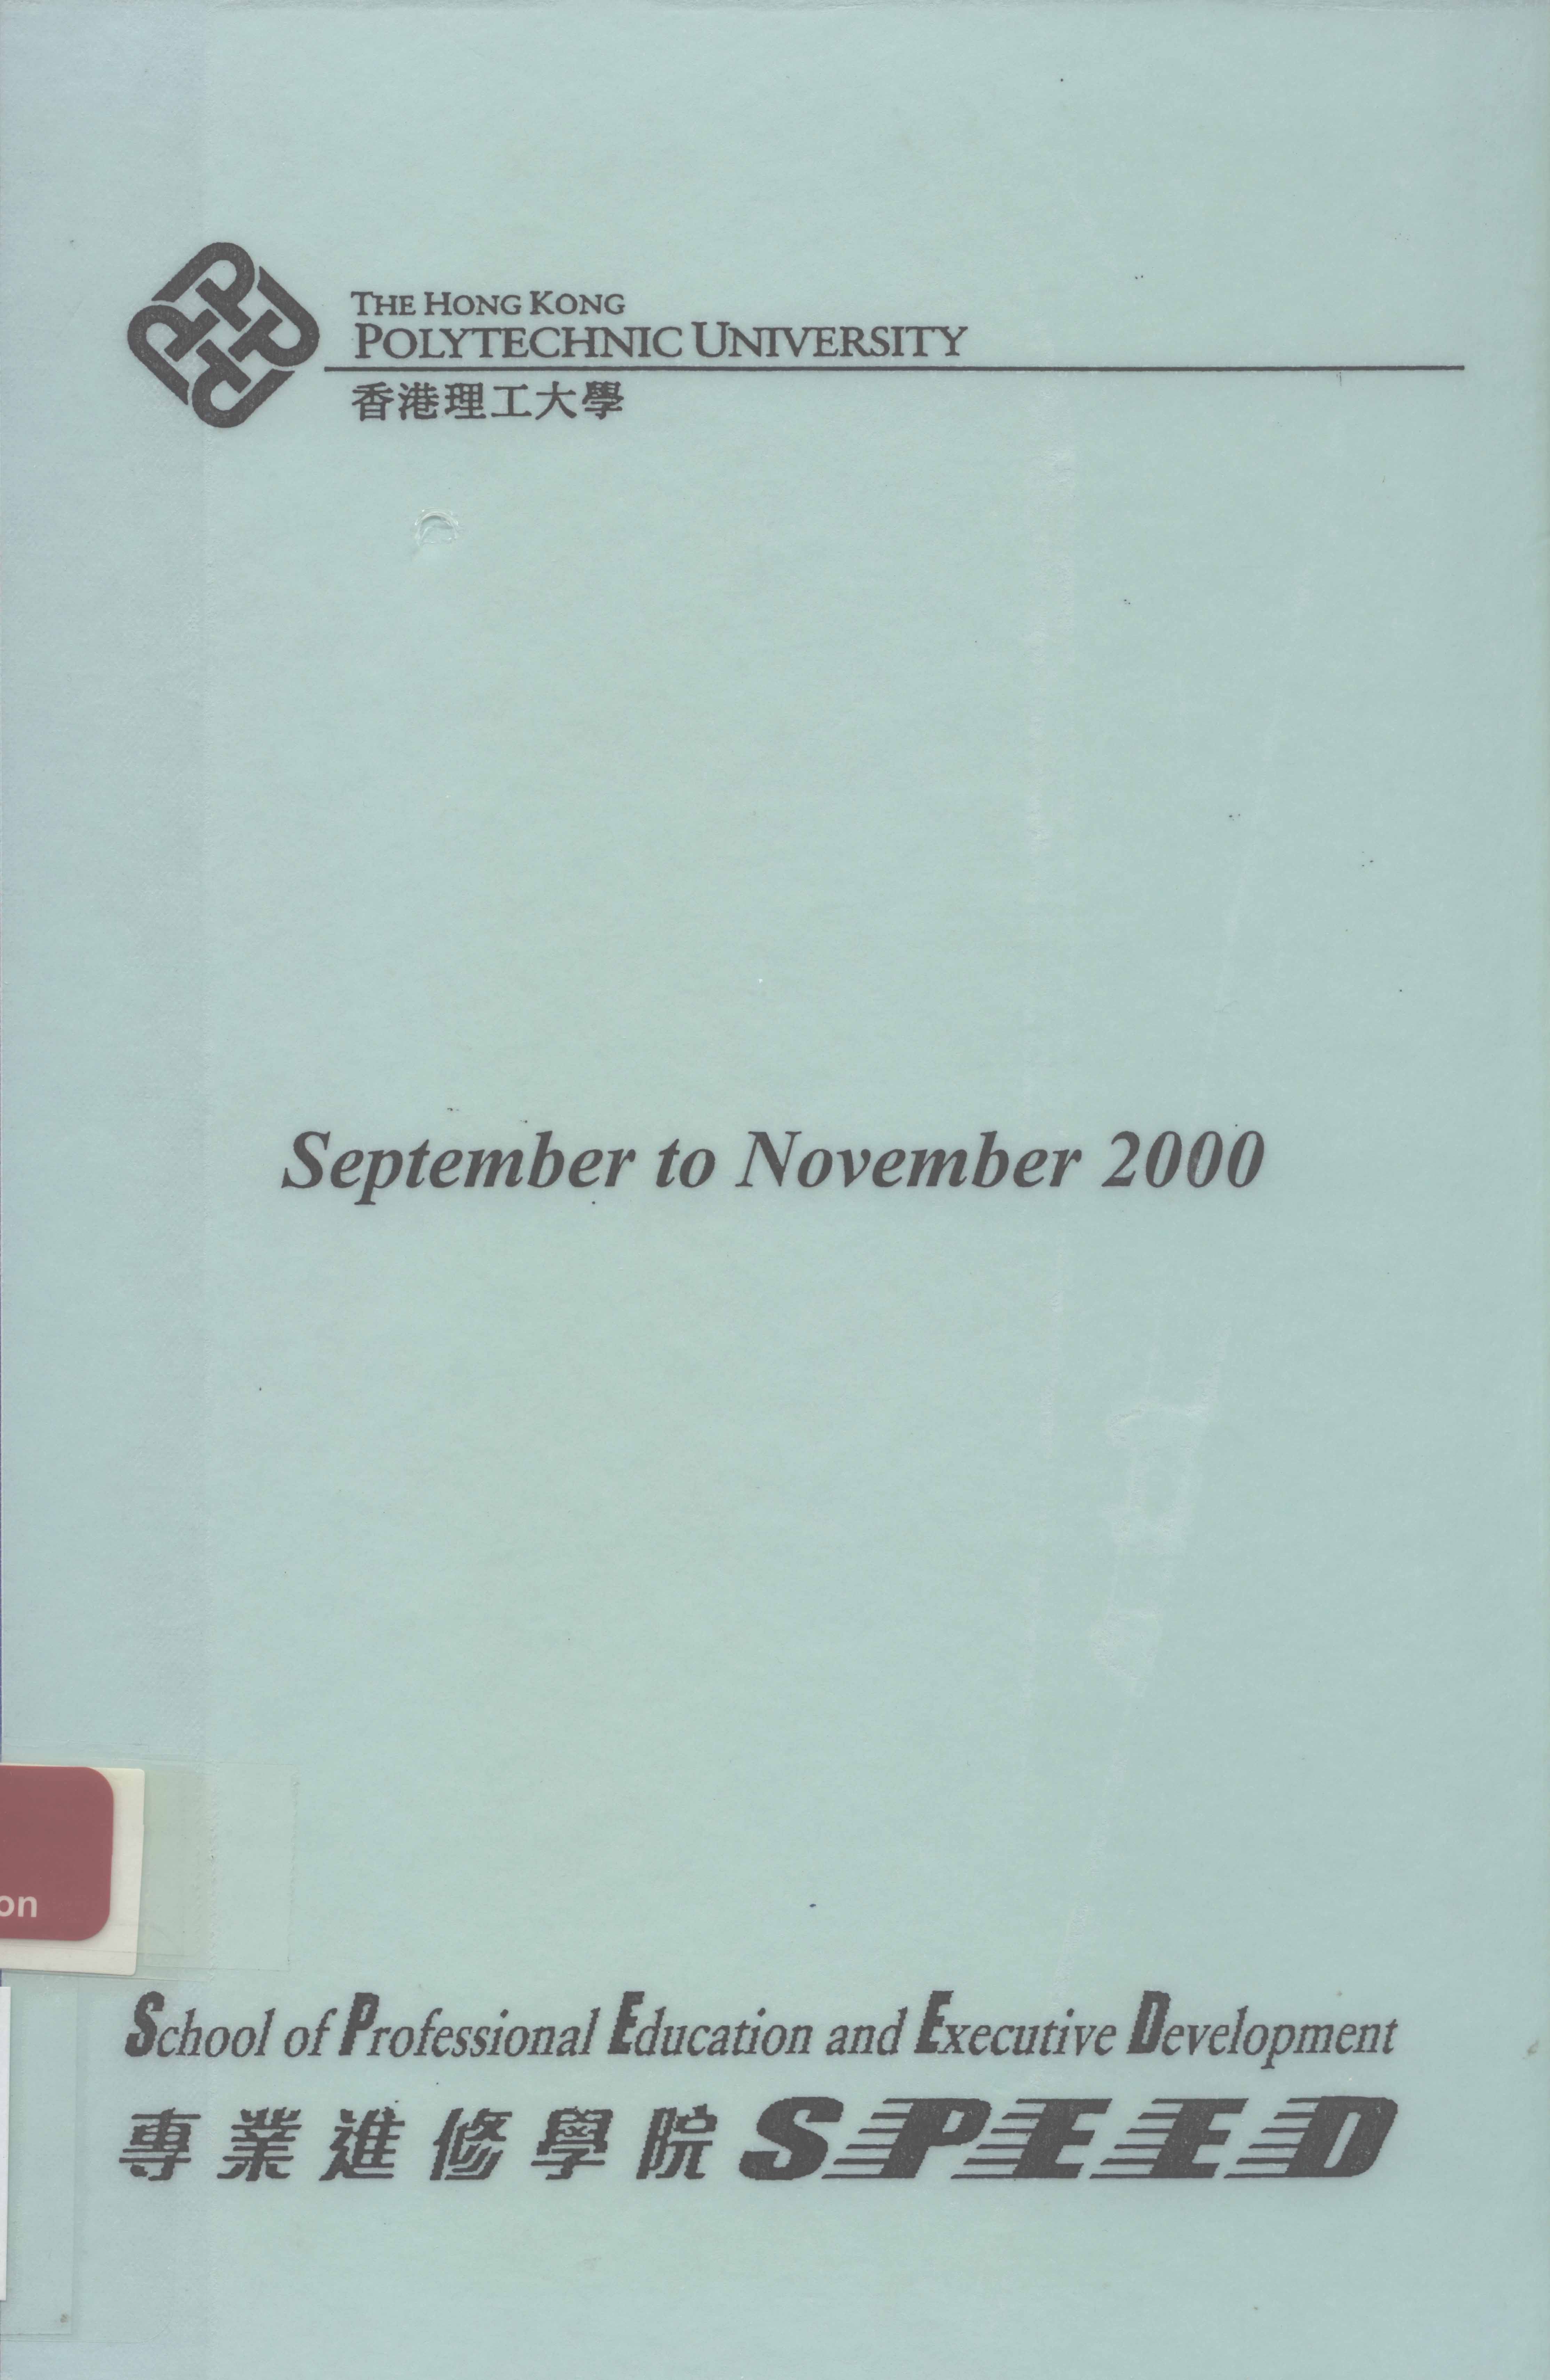 Prospectus [School of Professional Education and Executive Development (SPEED) - September to November 2000]